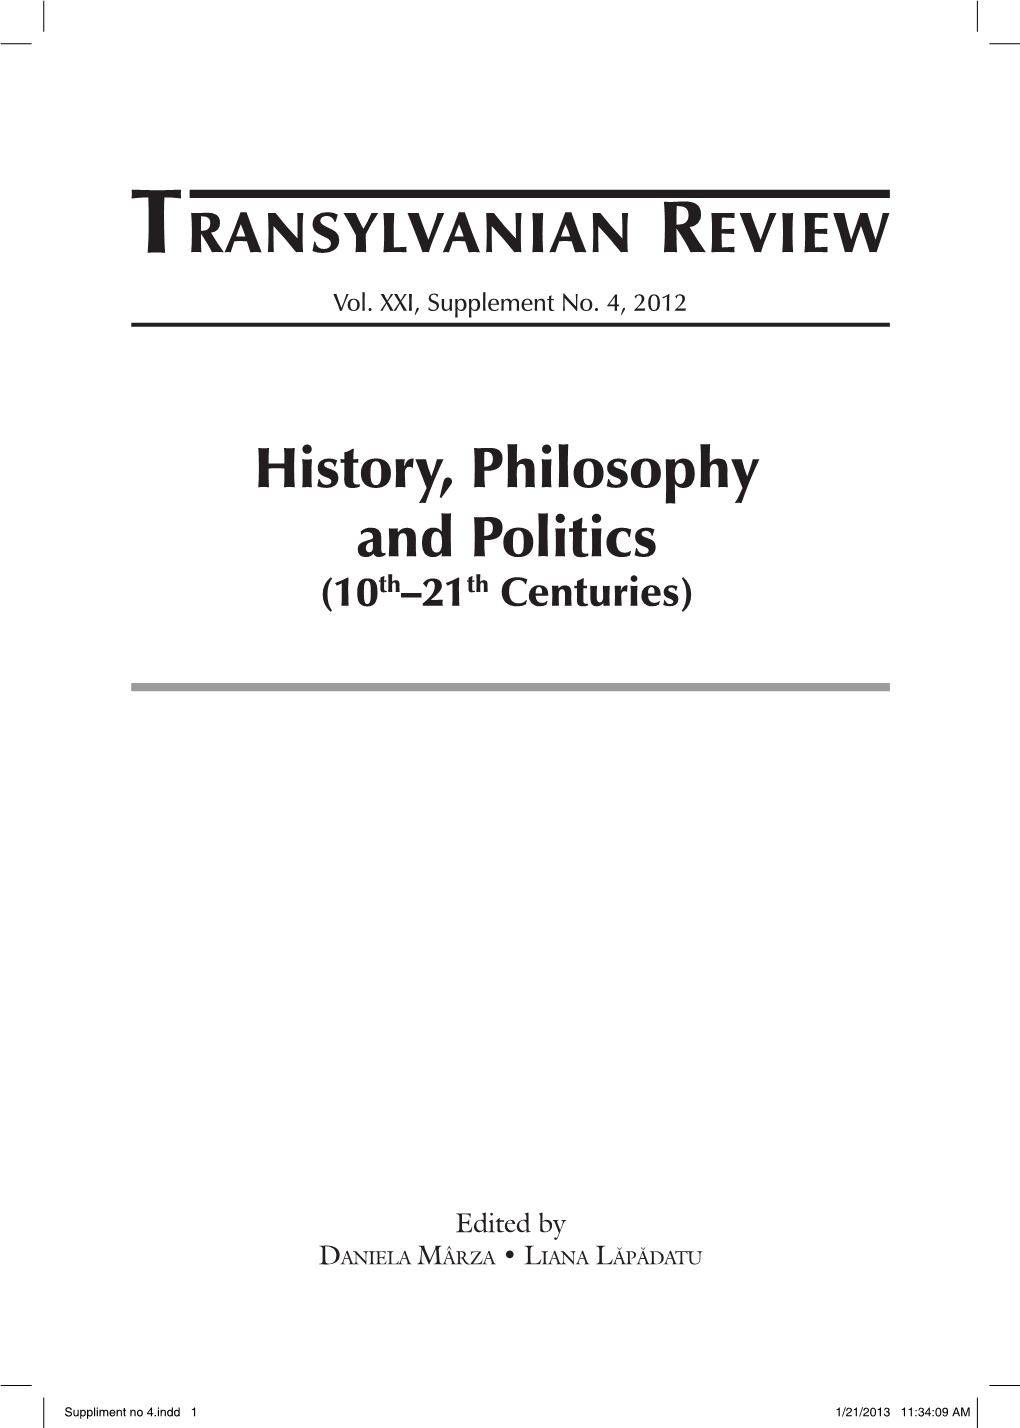 Transylvanian Review History, Philosophy and Politics